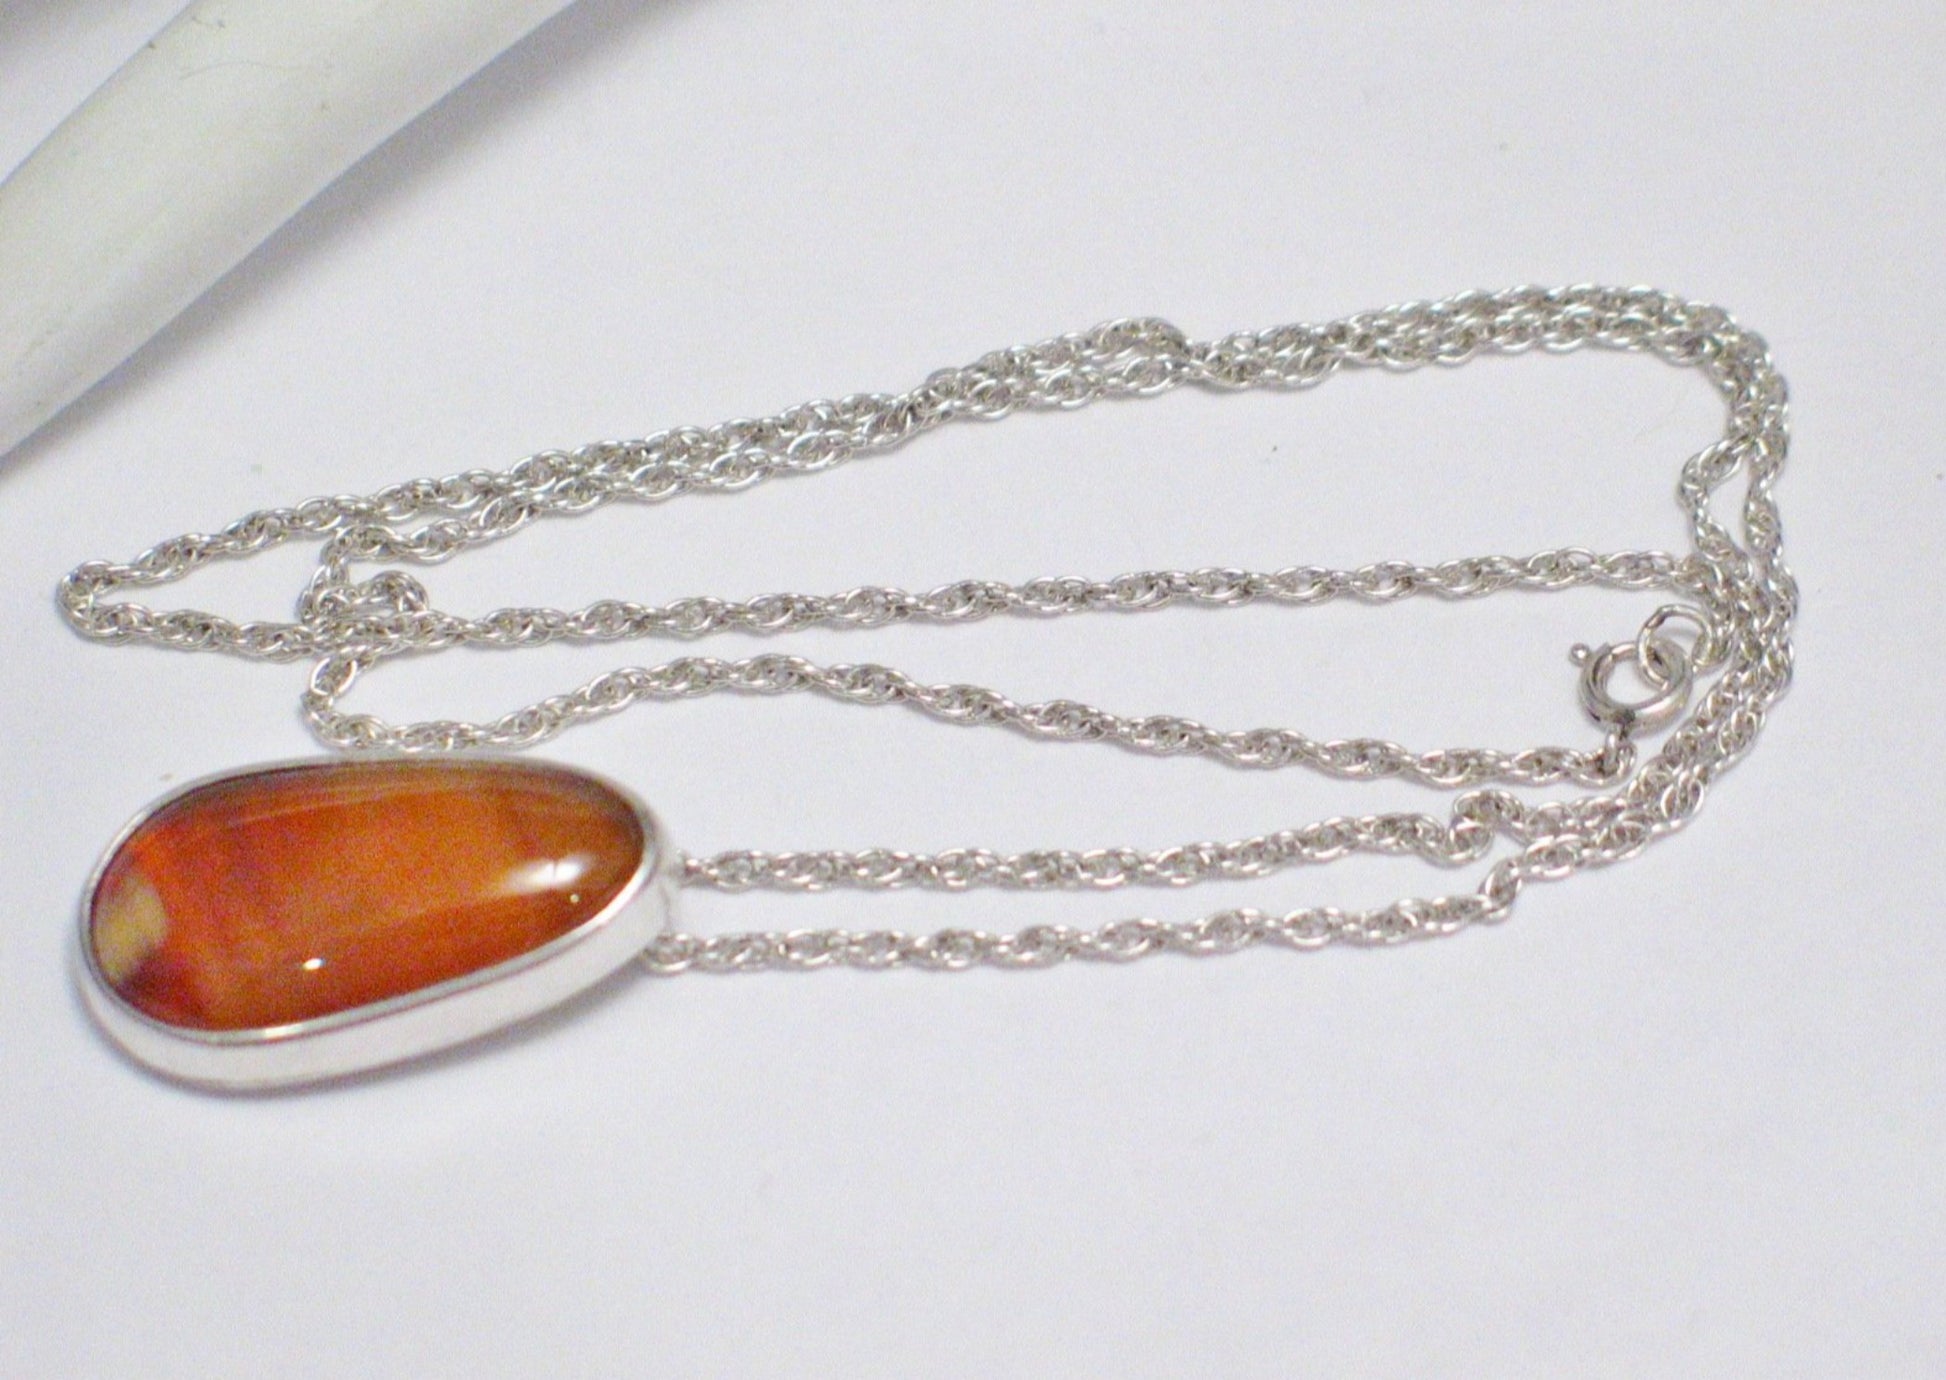 Sterling Silver Pendant necklace squash agate stone indian designer JP rope chain 18" - Blingschlingers Jewelry